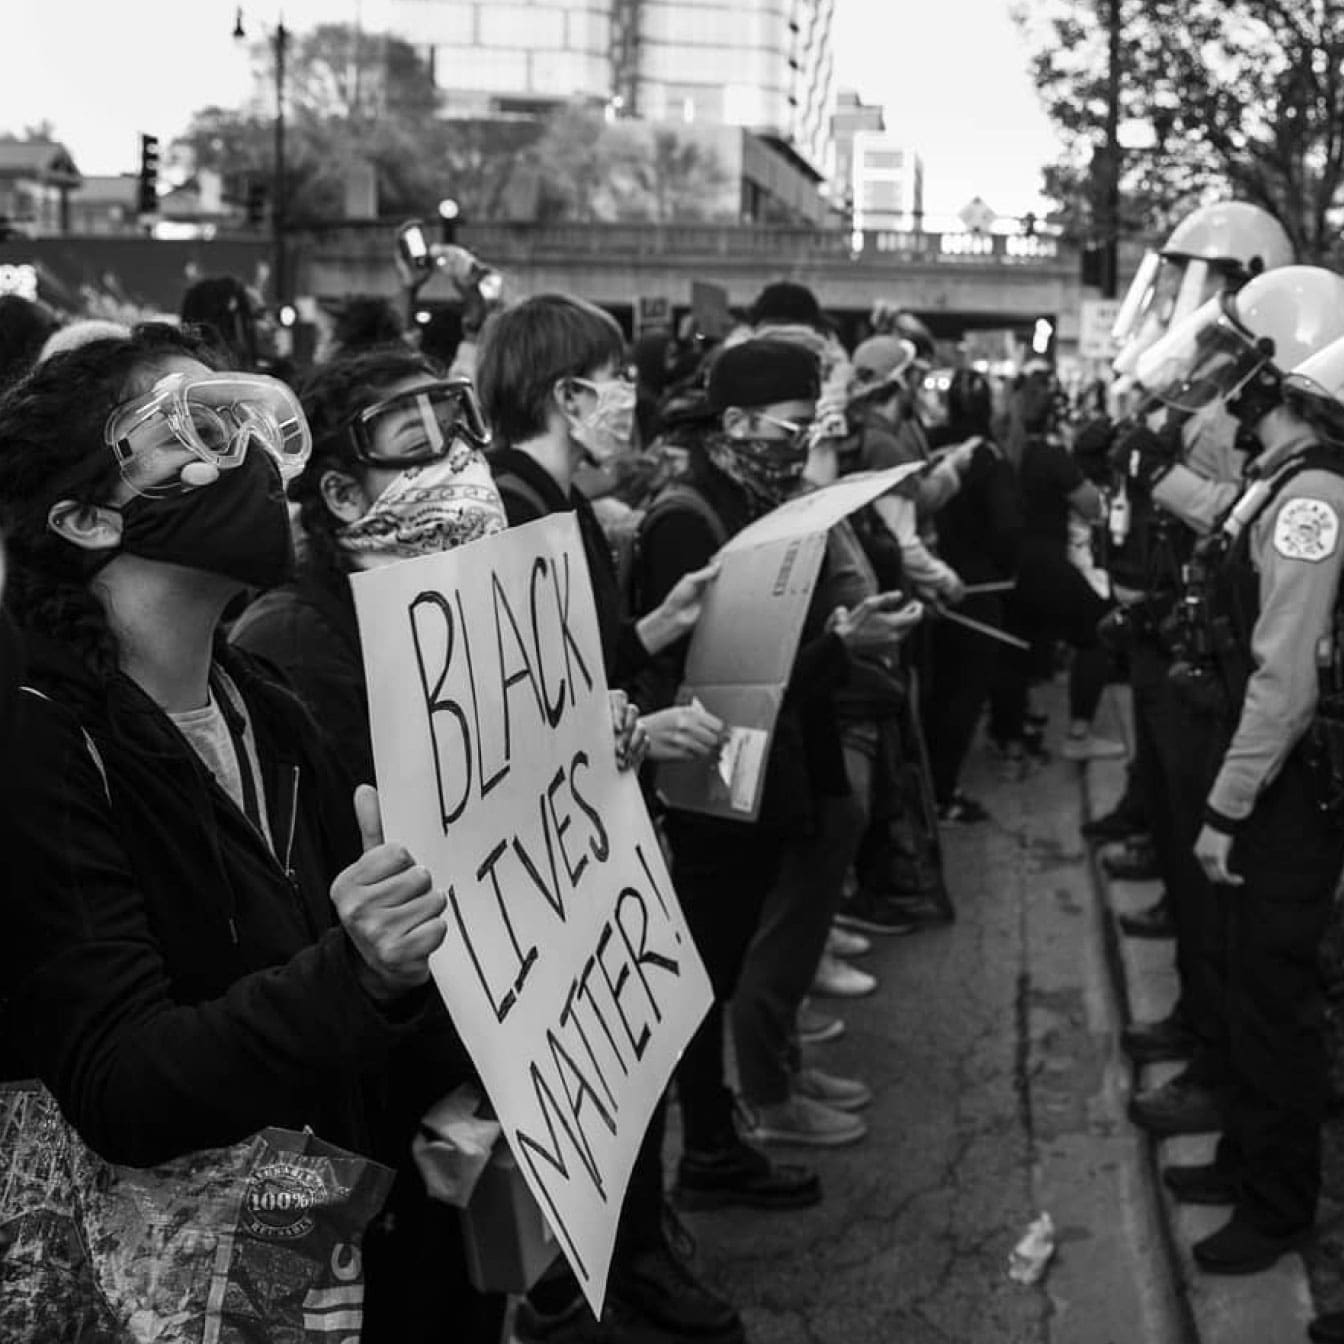 Black and white photo of protestors facing a line of policemen. One protestor holds a sign that says "Black Lives Matter!"